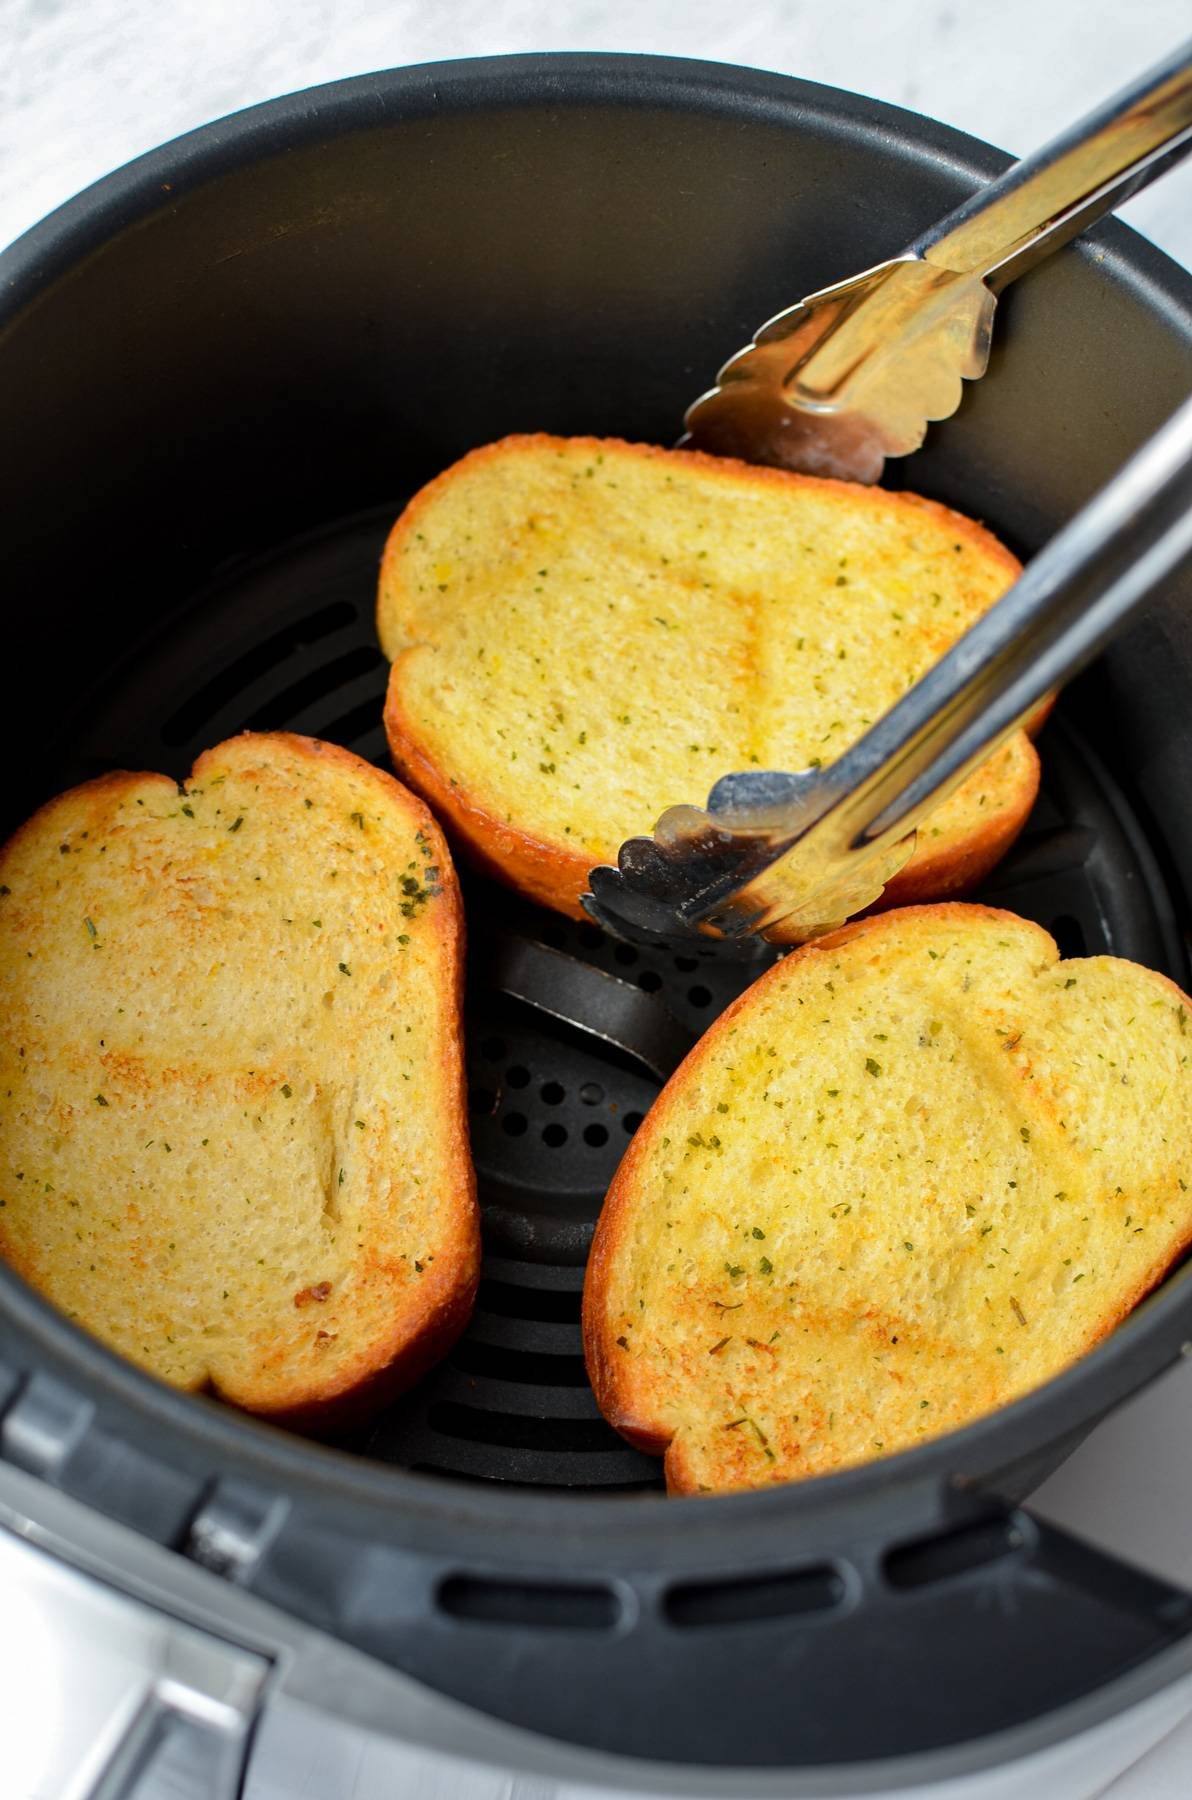 Removing a slice of frozen garlic bread from a cooking basket.